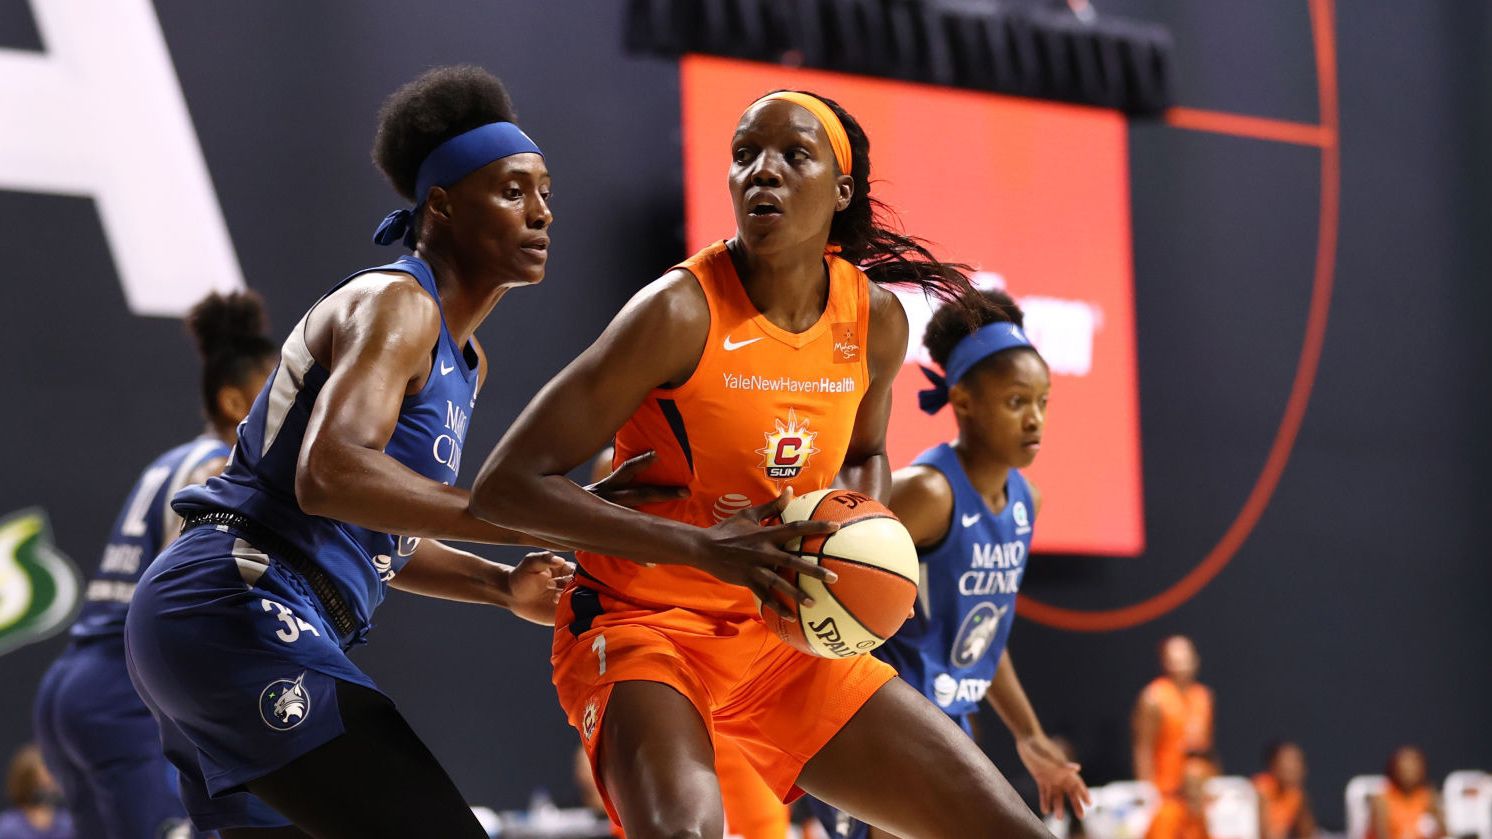 Canes in the WNBA: Week 3